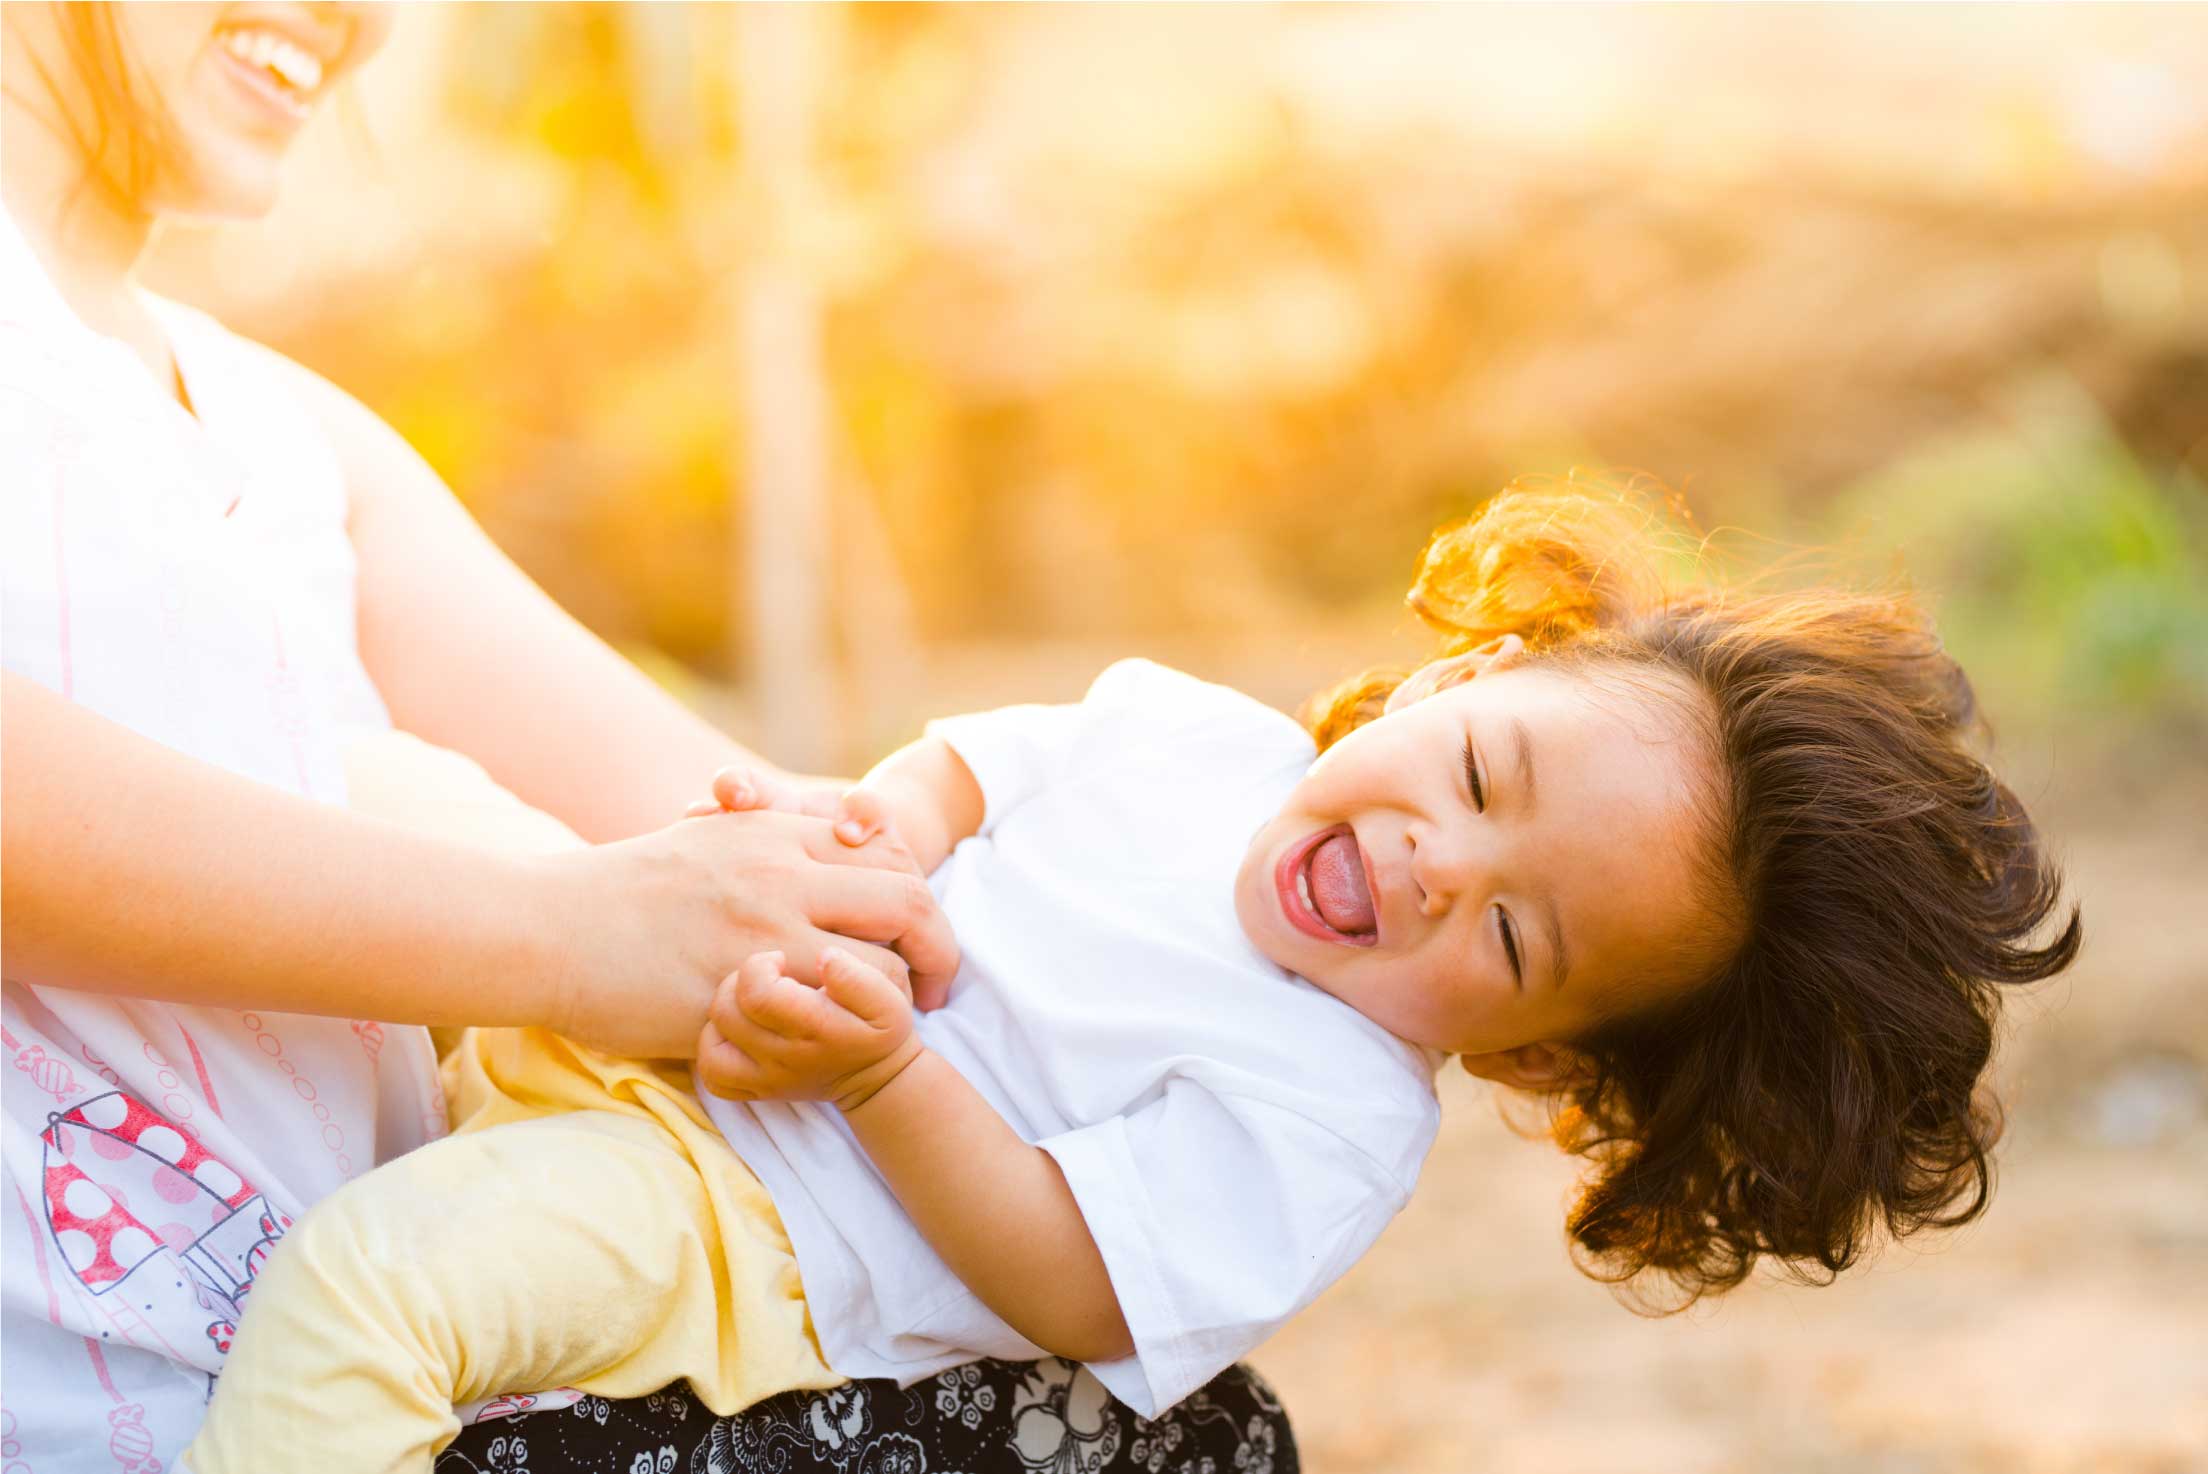 Woman swinging laughing young boy around in the setting sun